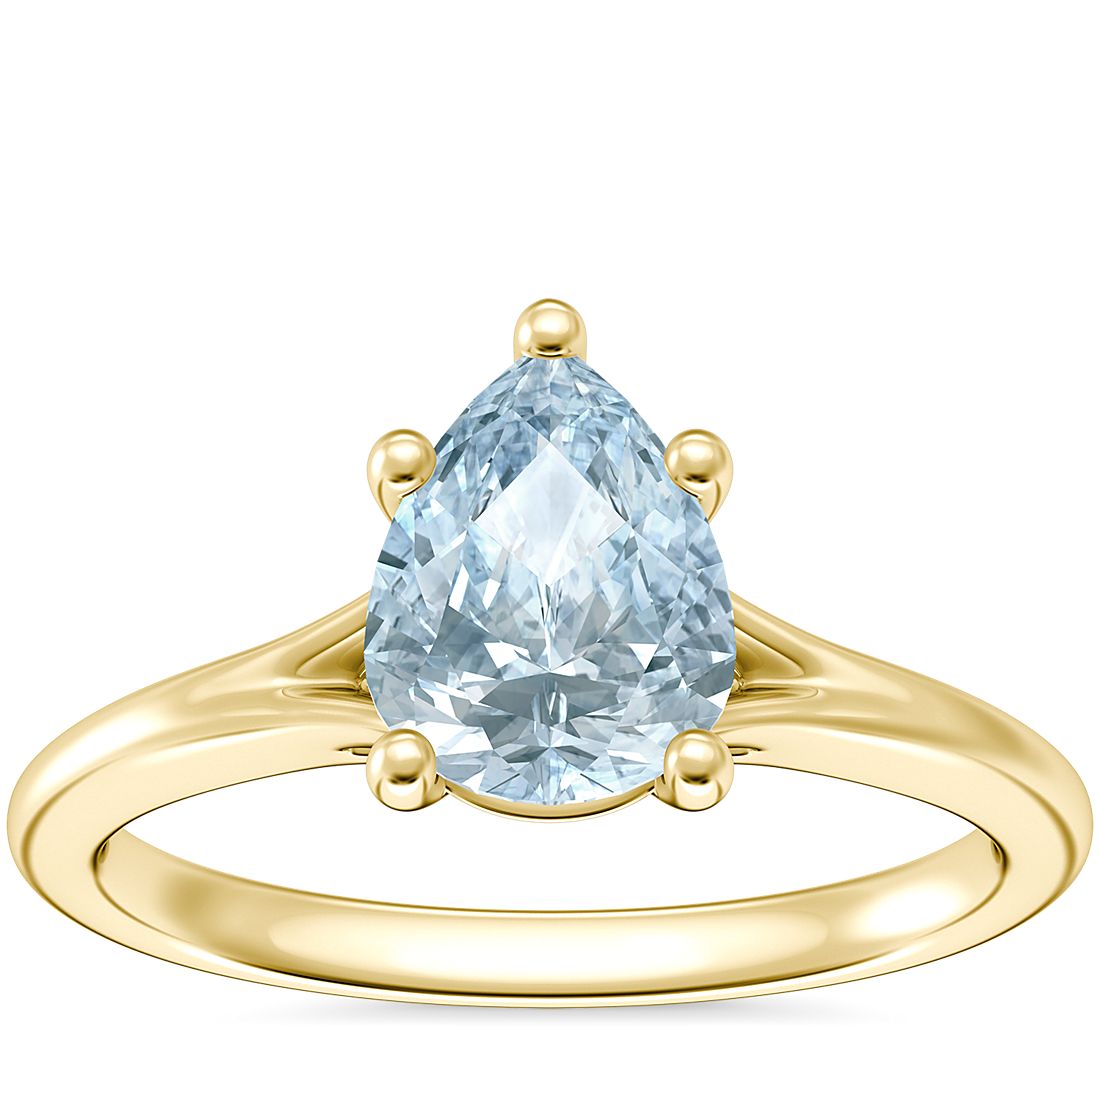 Petite Split Shank Solitaire Engagement Ring with Pear-Shaped Aquamarine in 18k Yellow Gold (8x6mm)